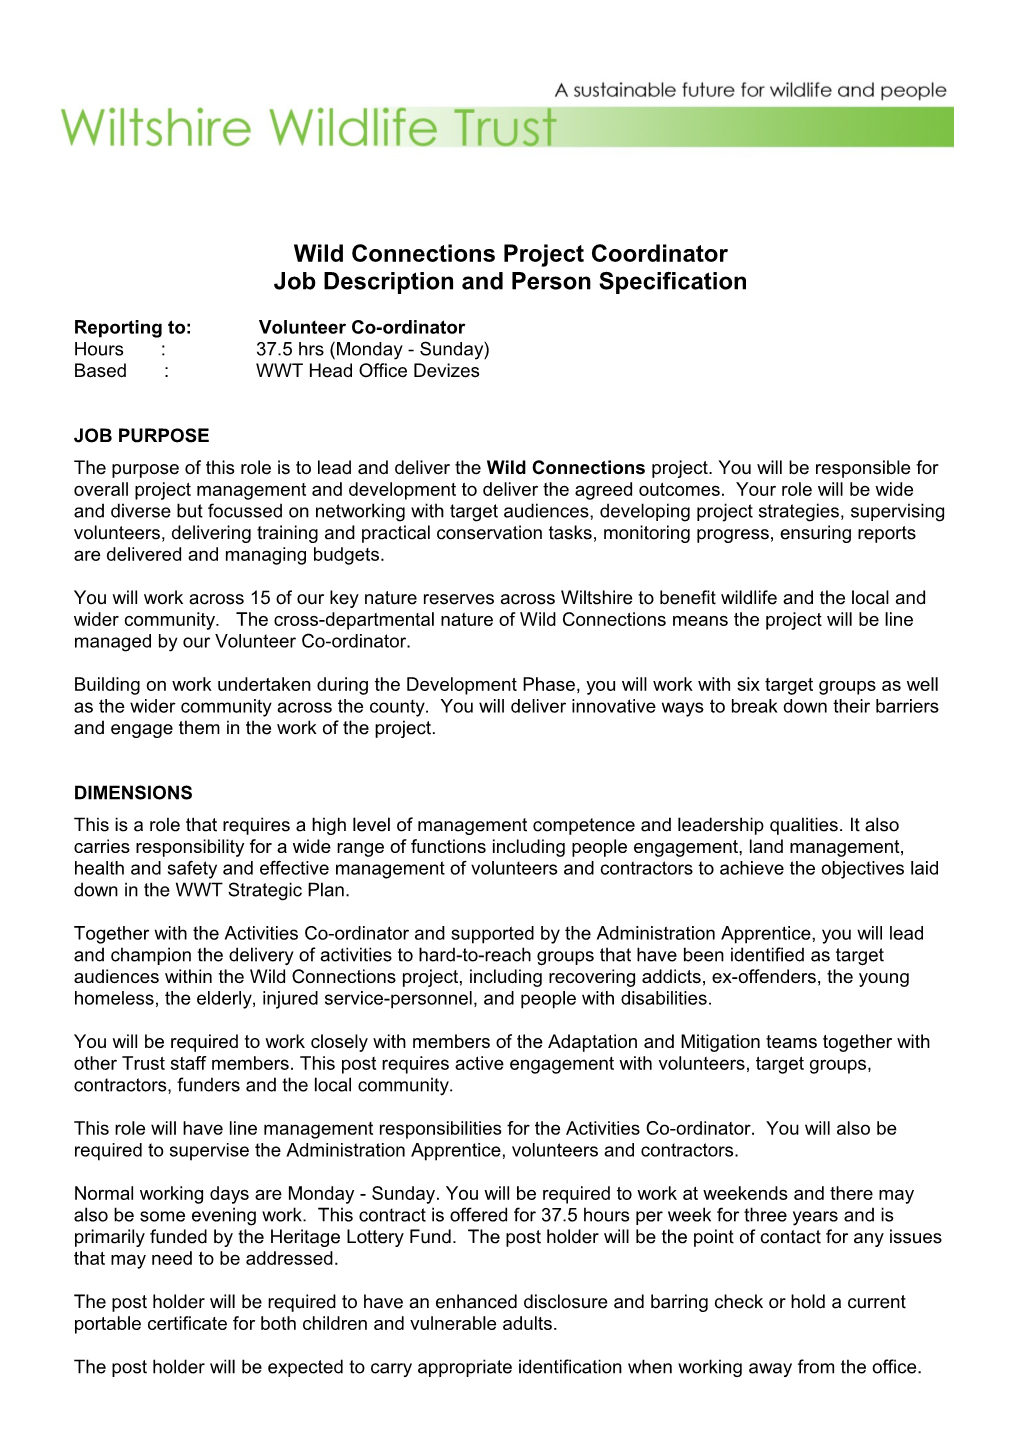 Wild Connections Project Coordinator